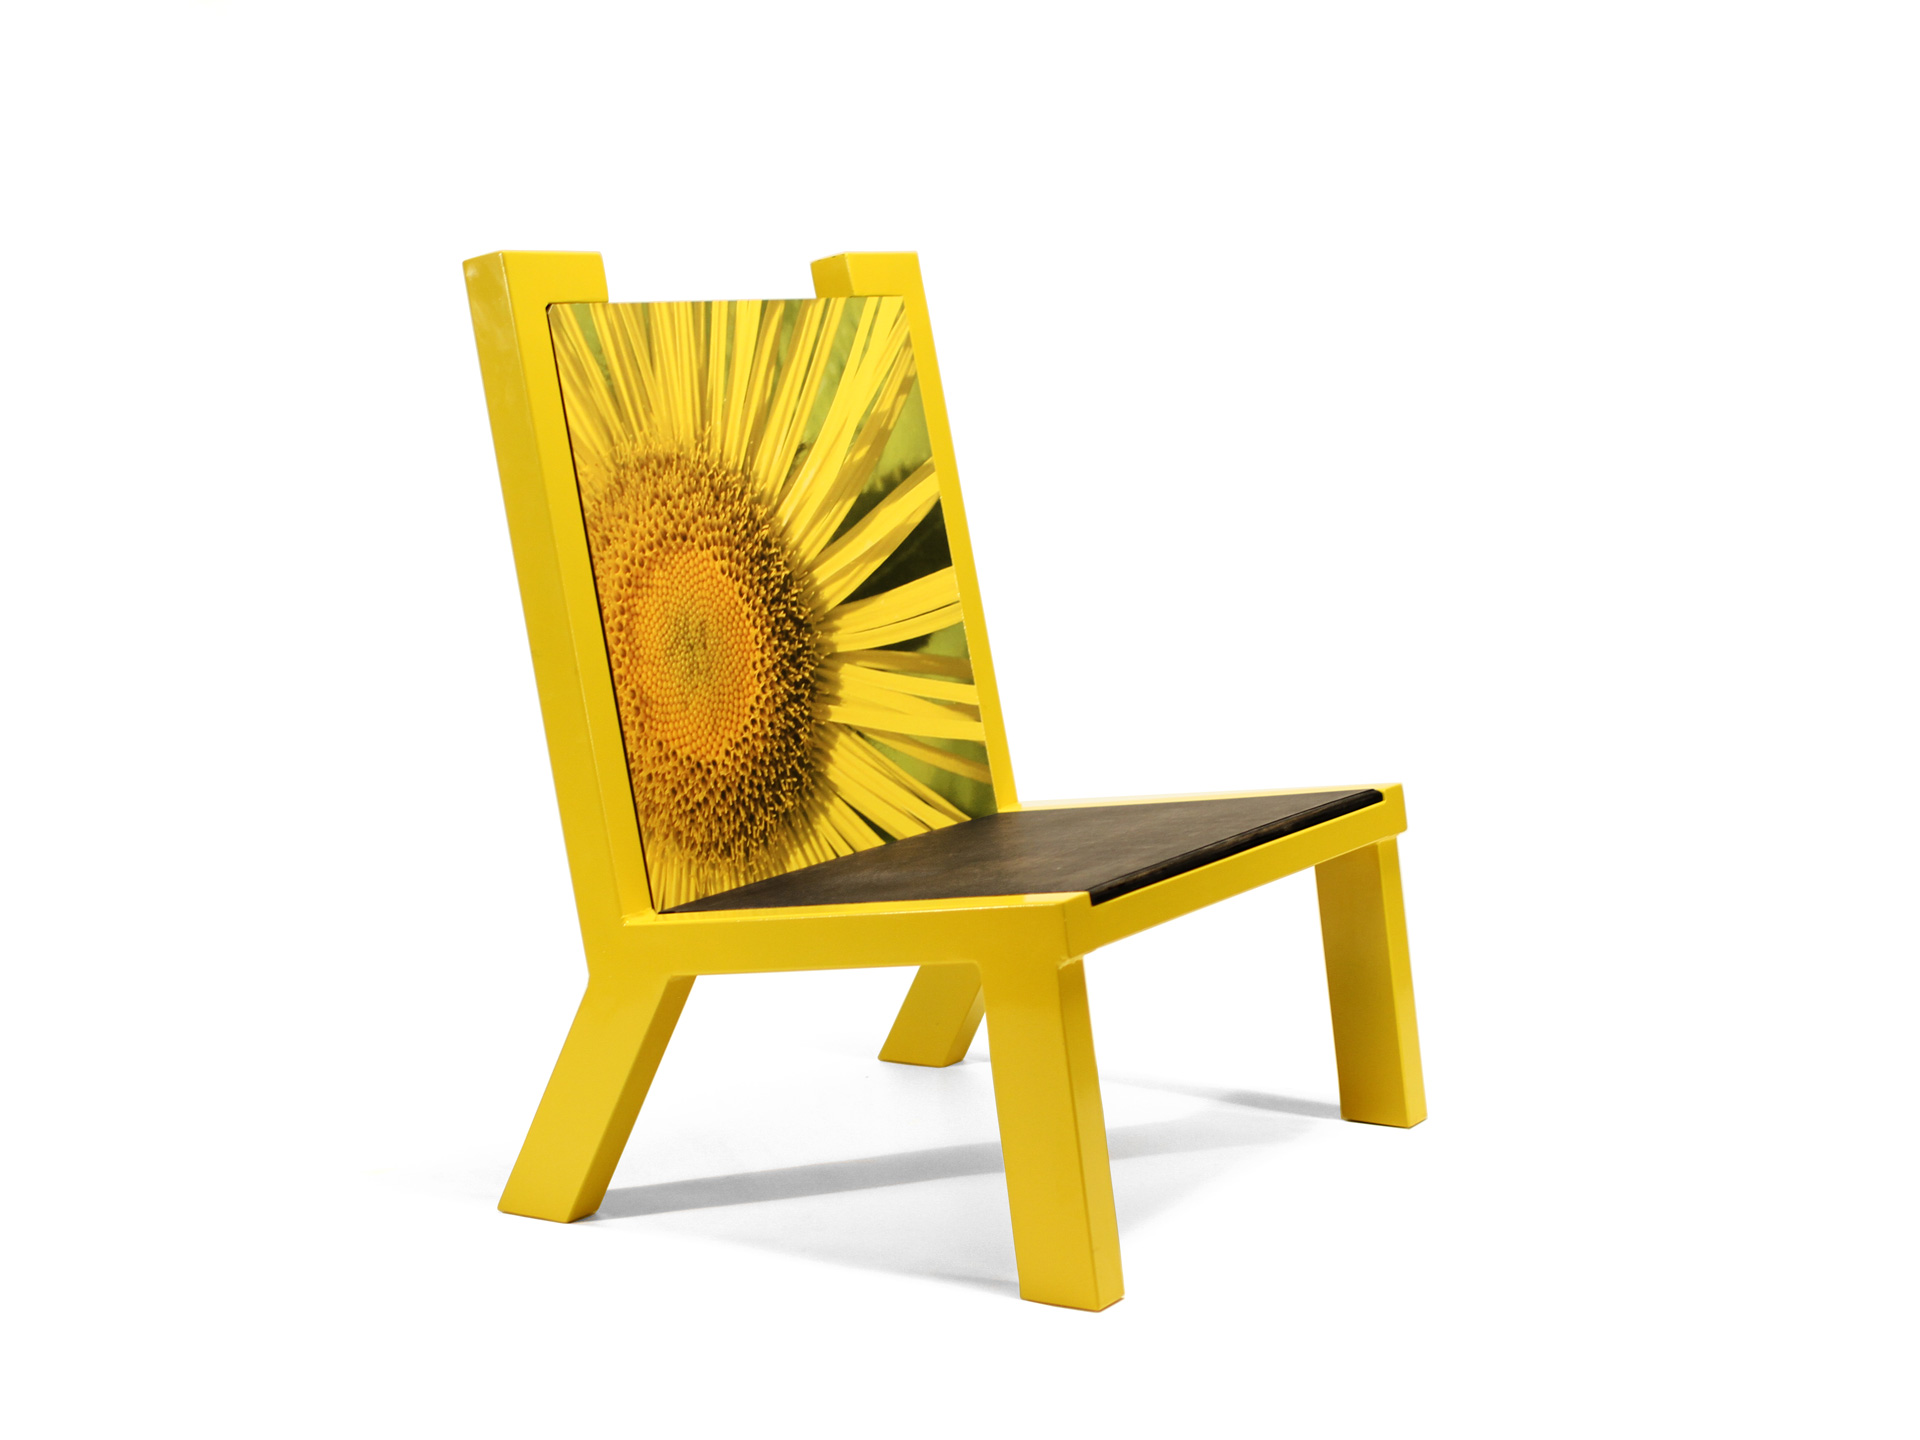 Camelback chair in yellow shown from the front